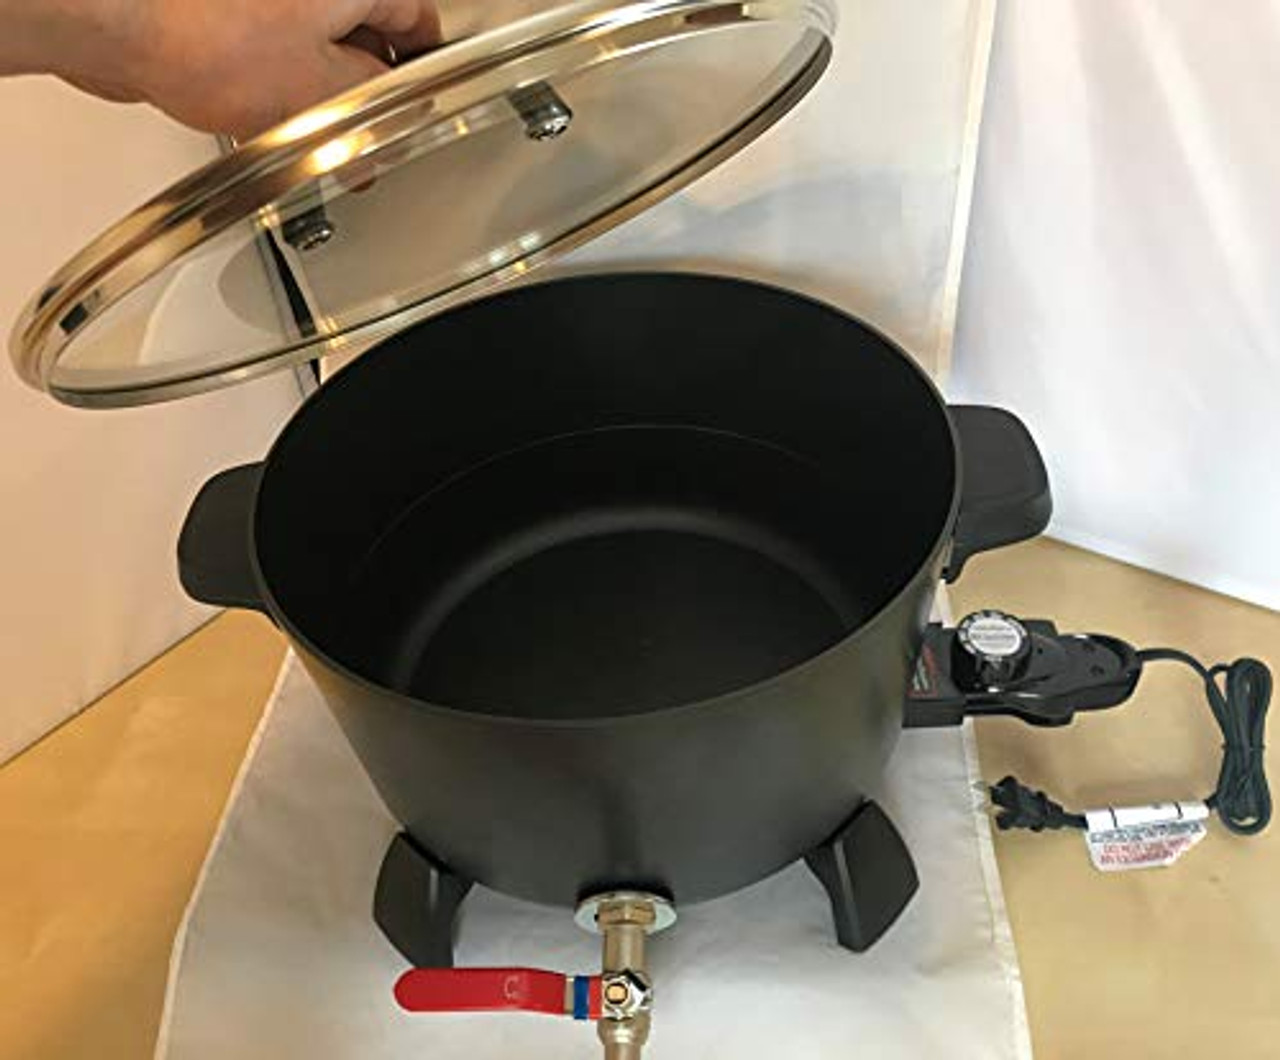 Wax Melter for Candle Making: Extra Large 17.5 LB Wax Capacity Electric Wax  Melting Pot Machine